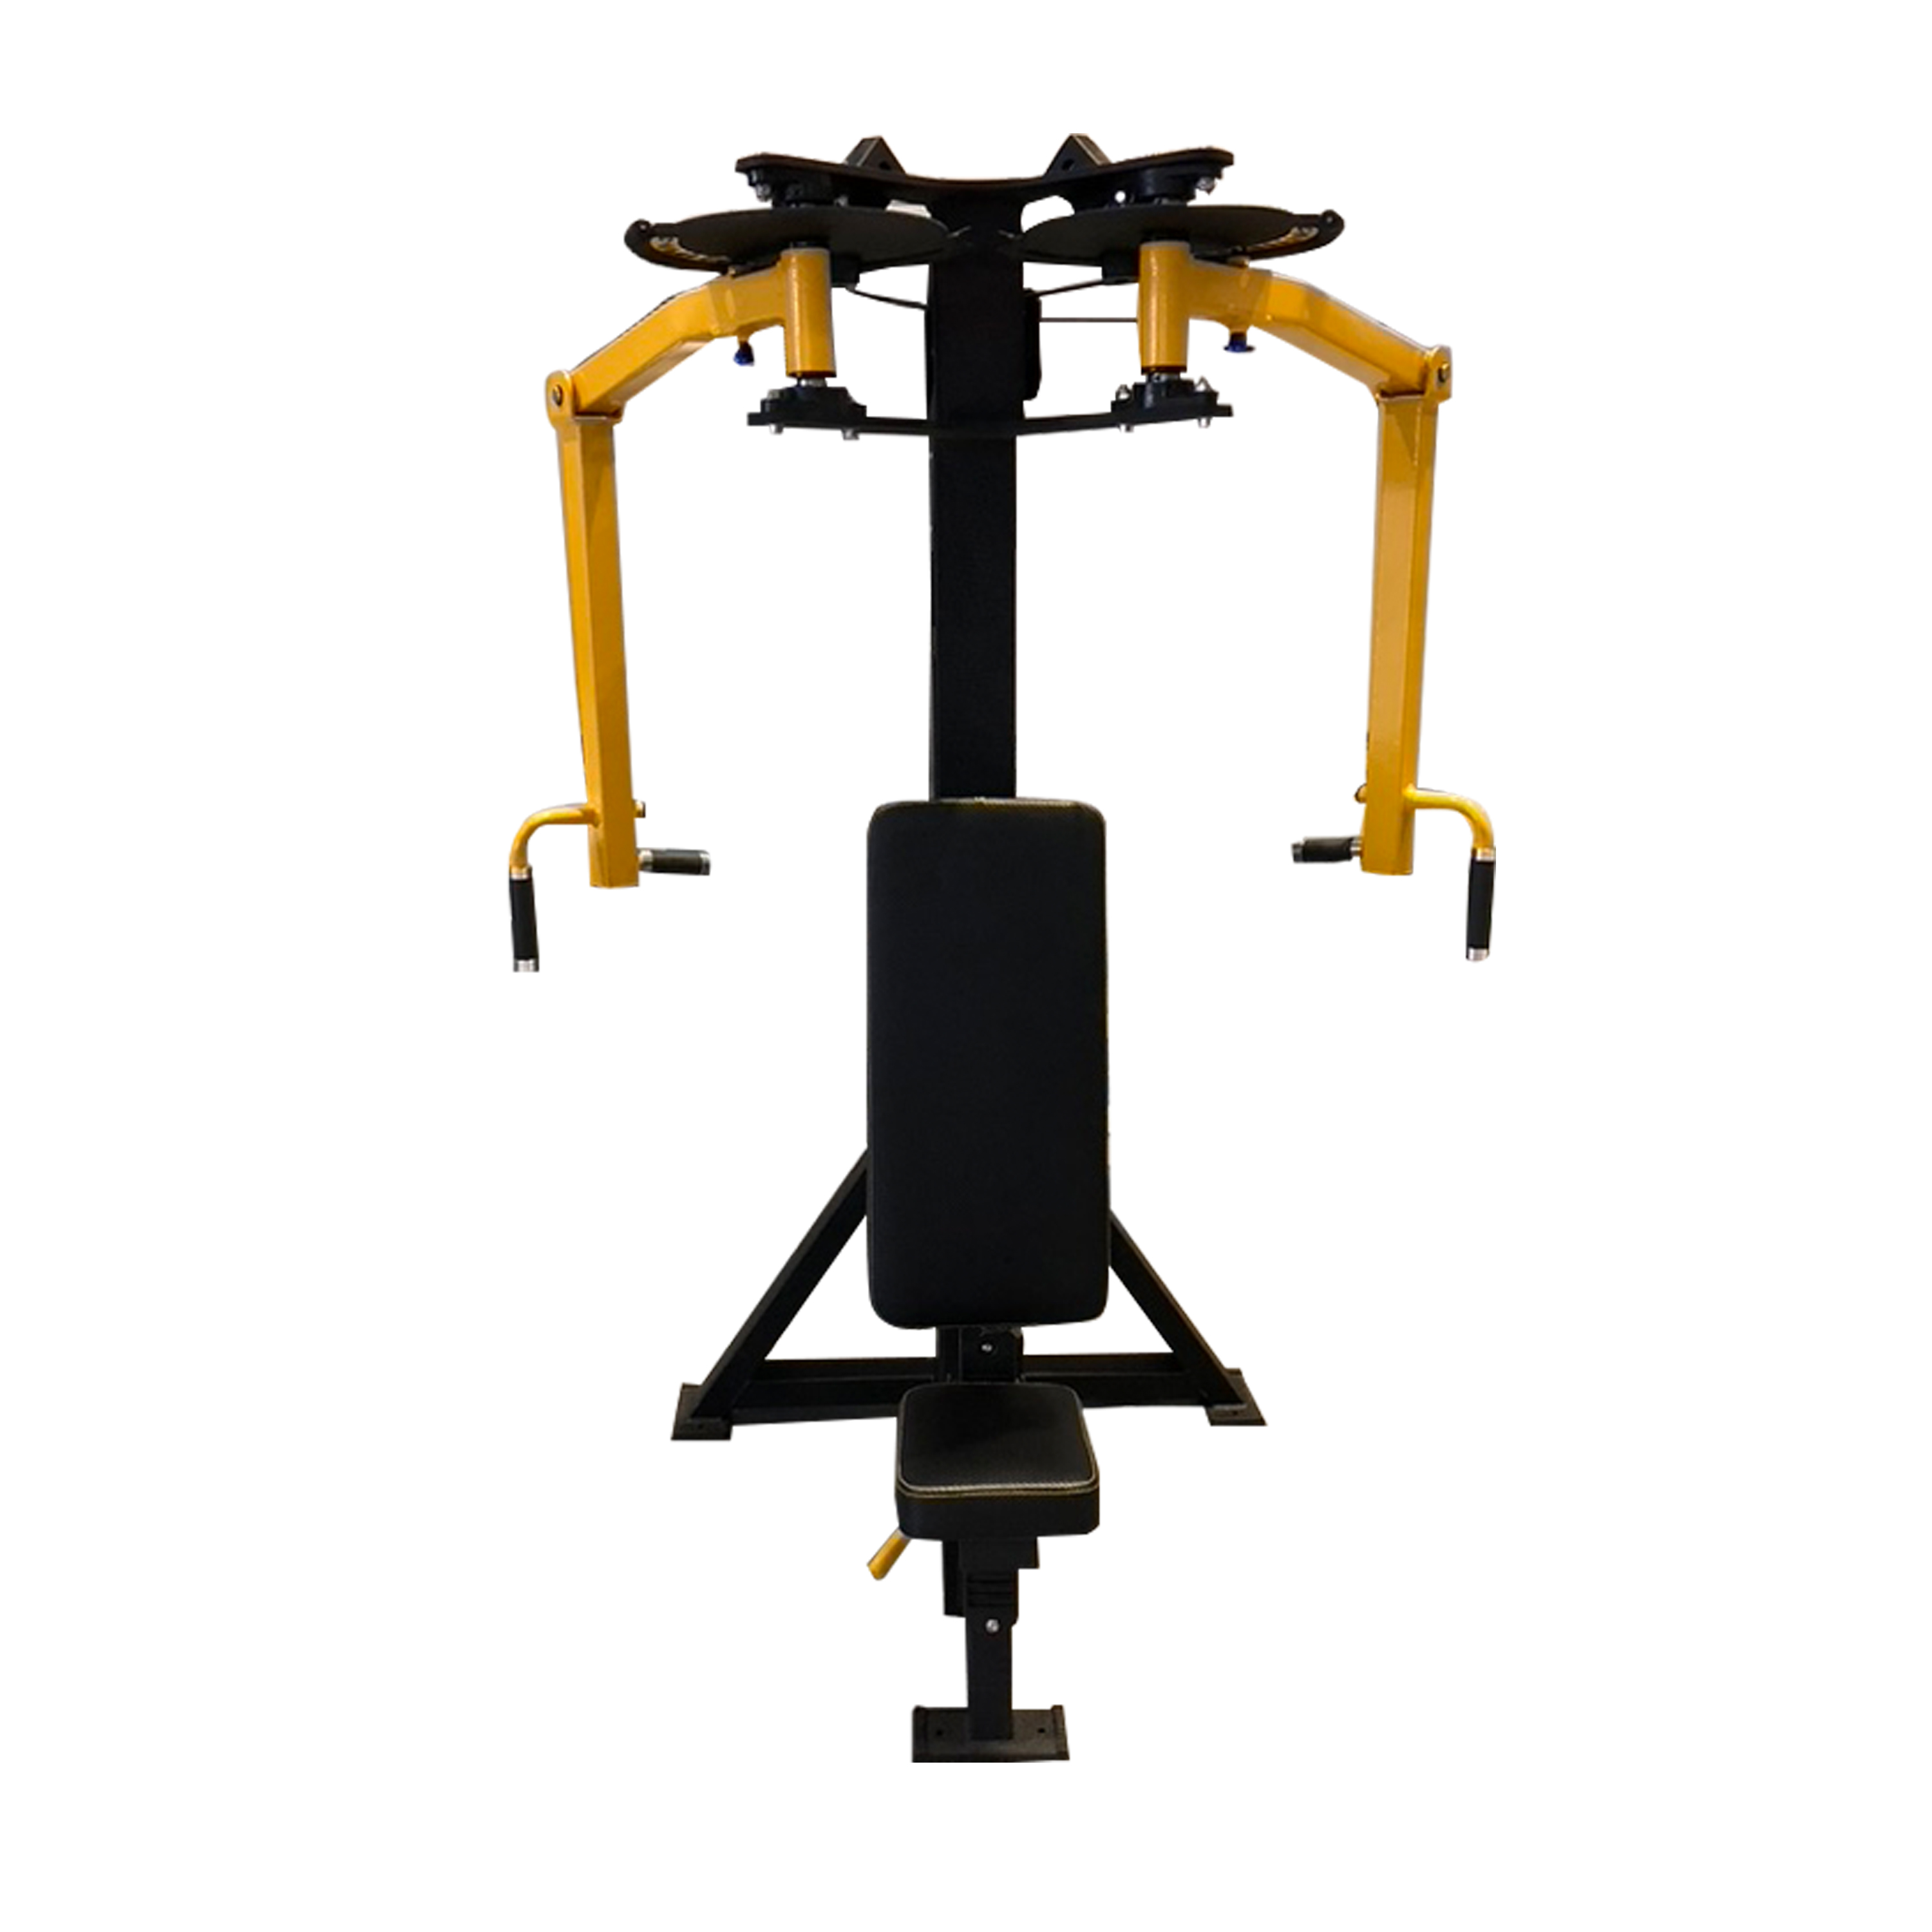 Gym Equipment Seated Cable Rear Delt Pec Fly Machine for Exercise 